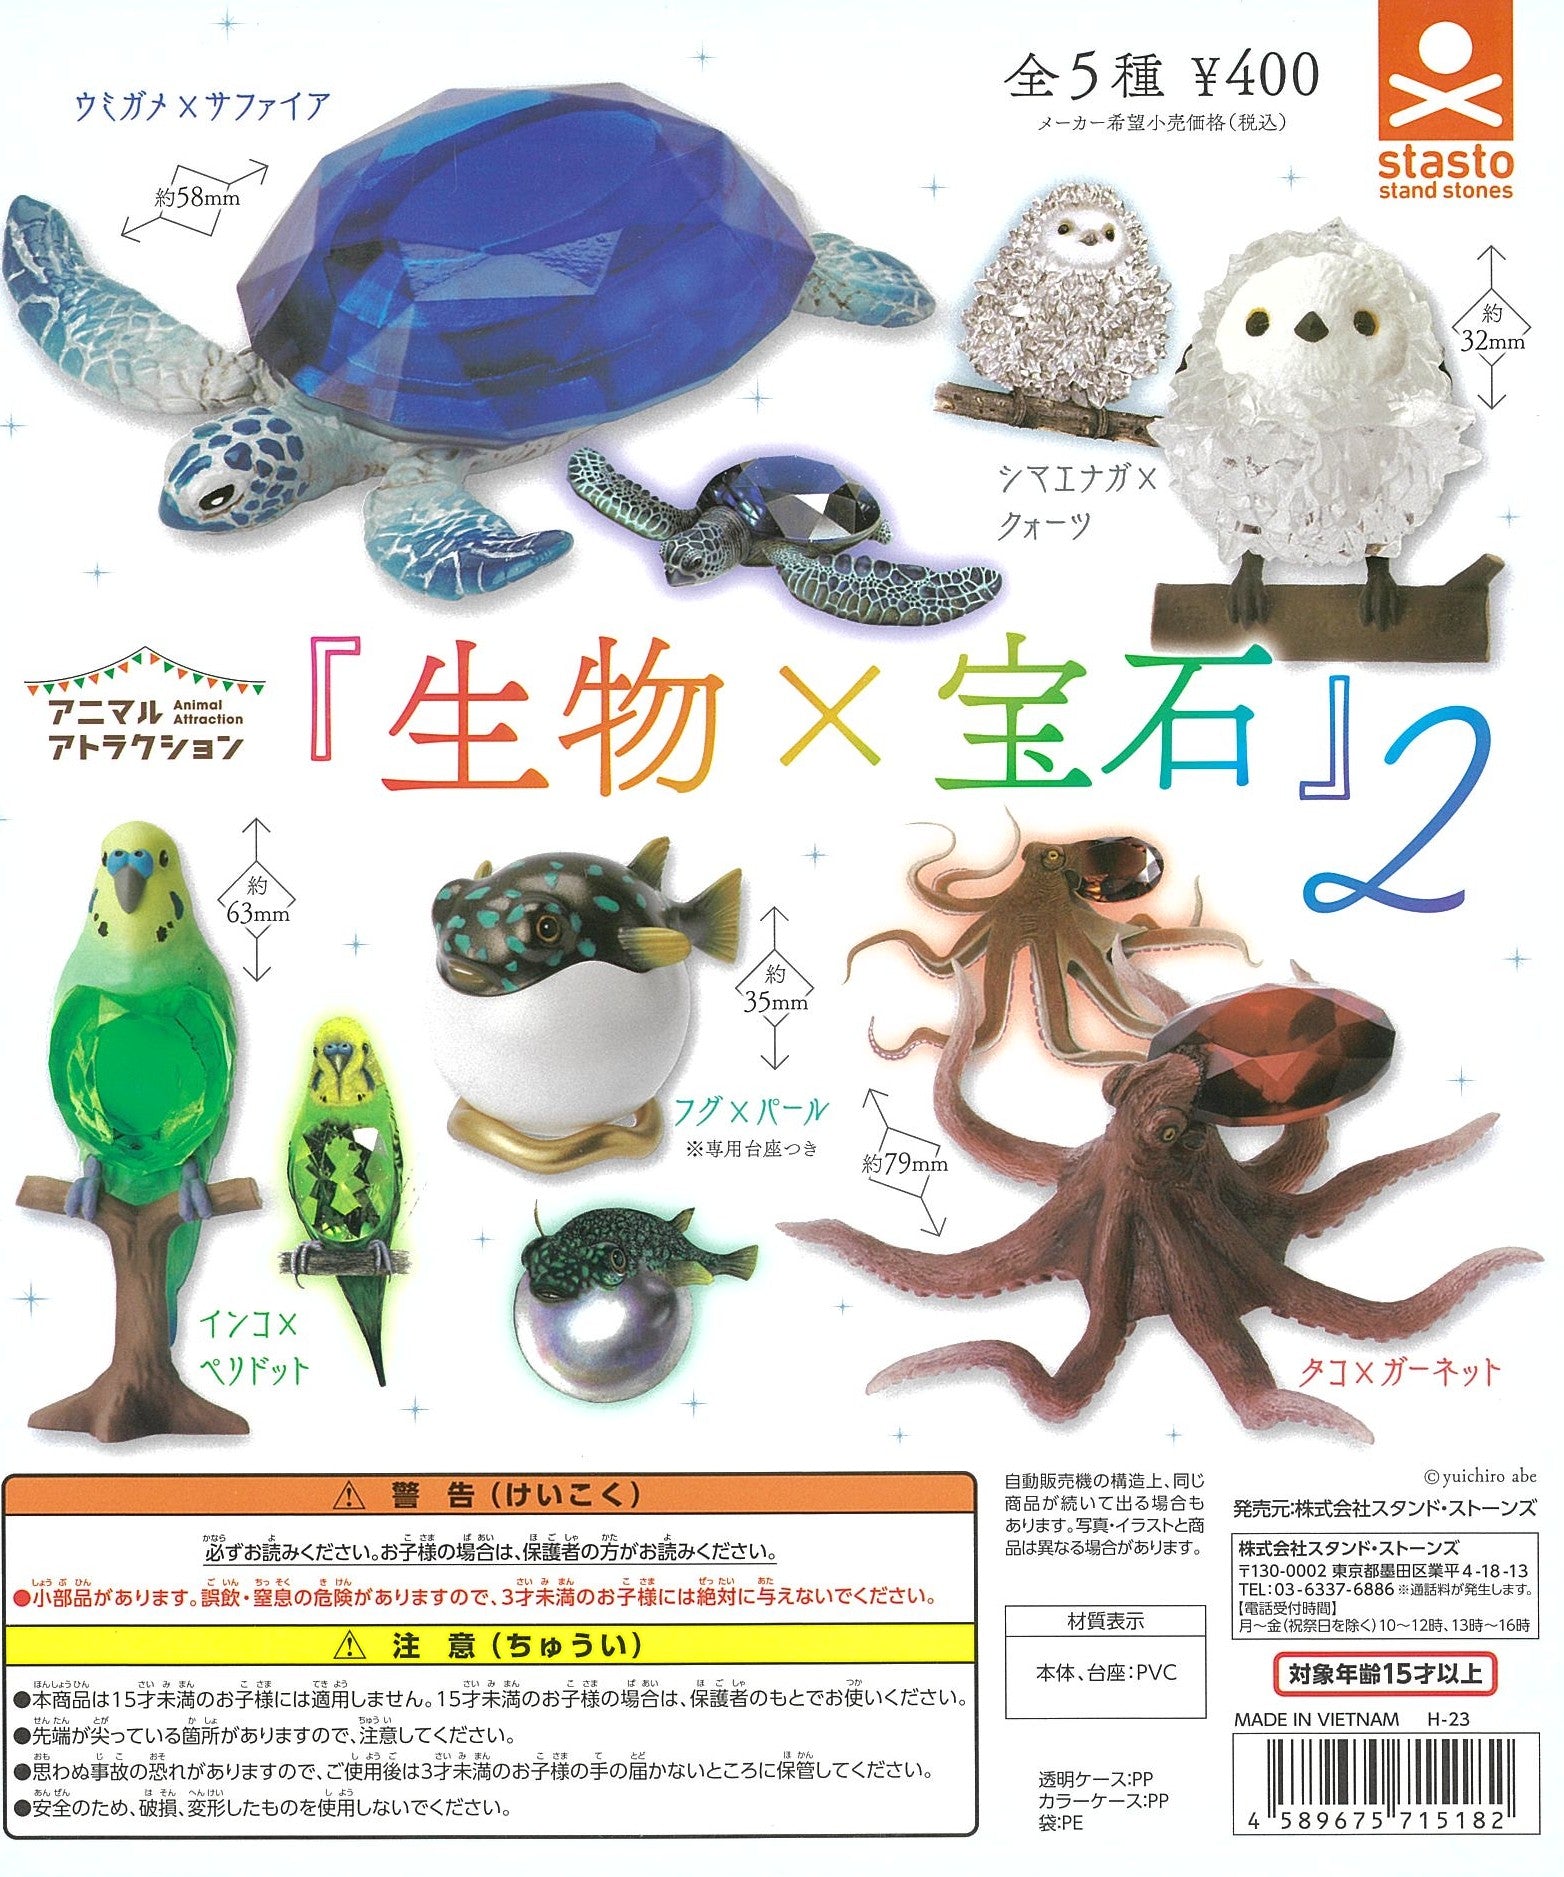 CP2513 Animal Attraction Creature x Jewelry 2